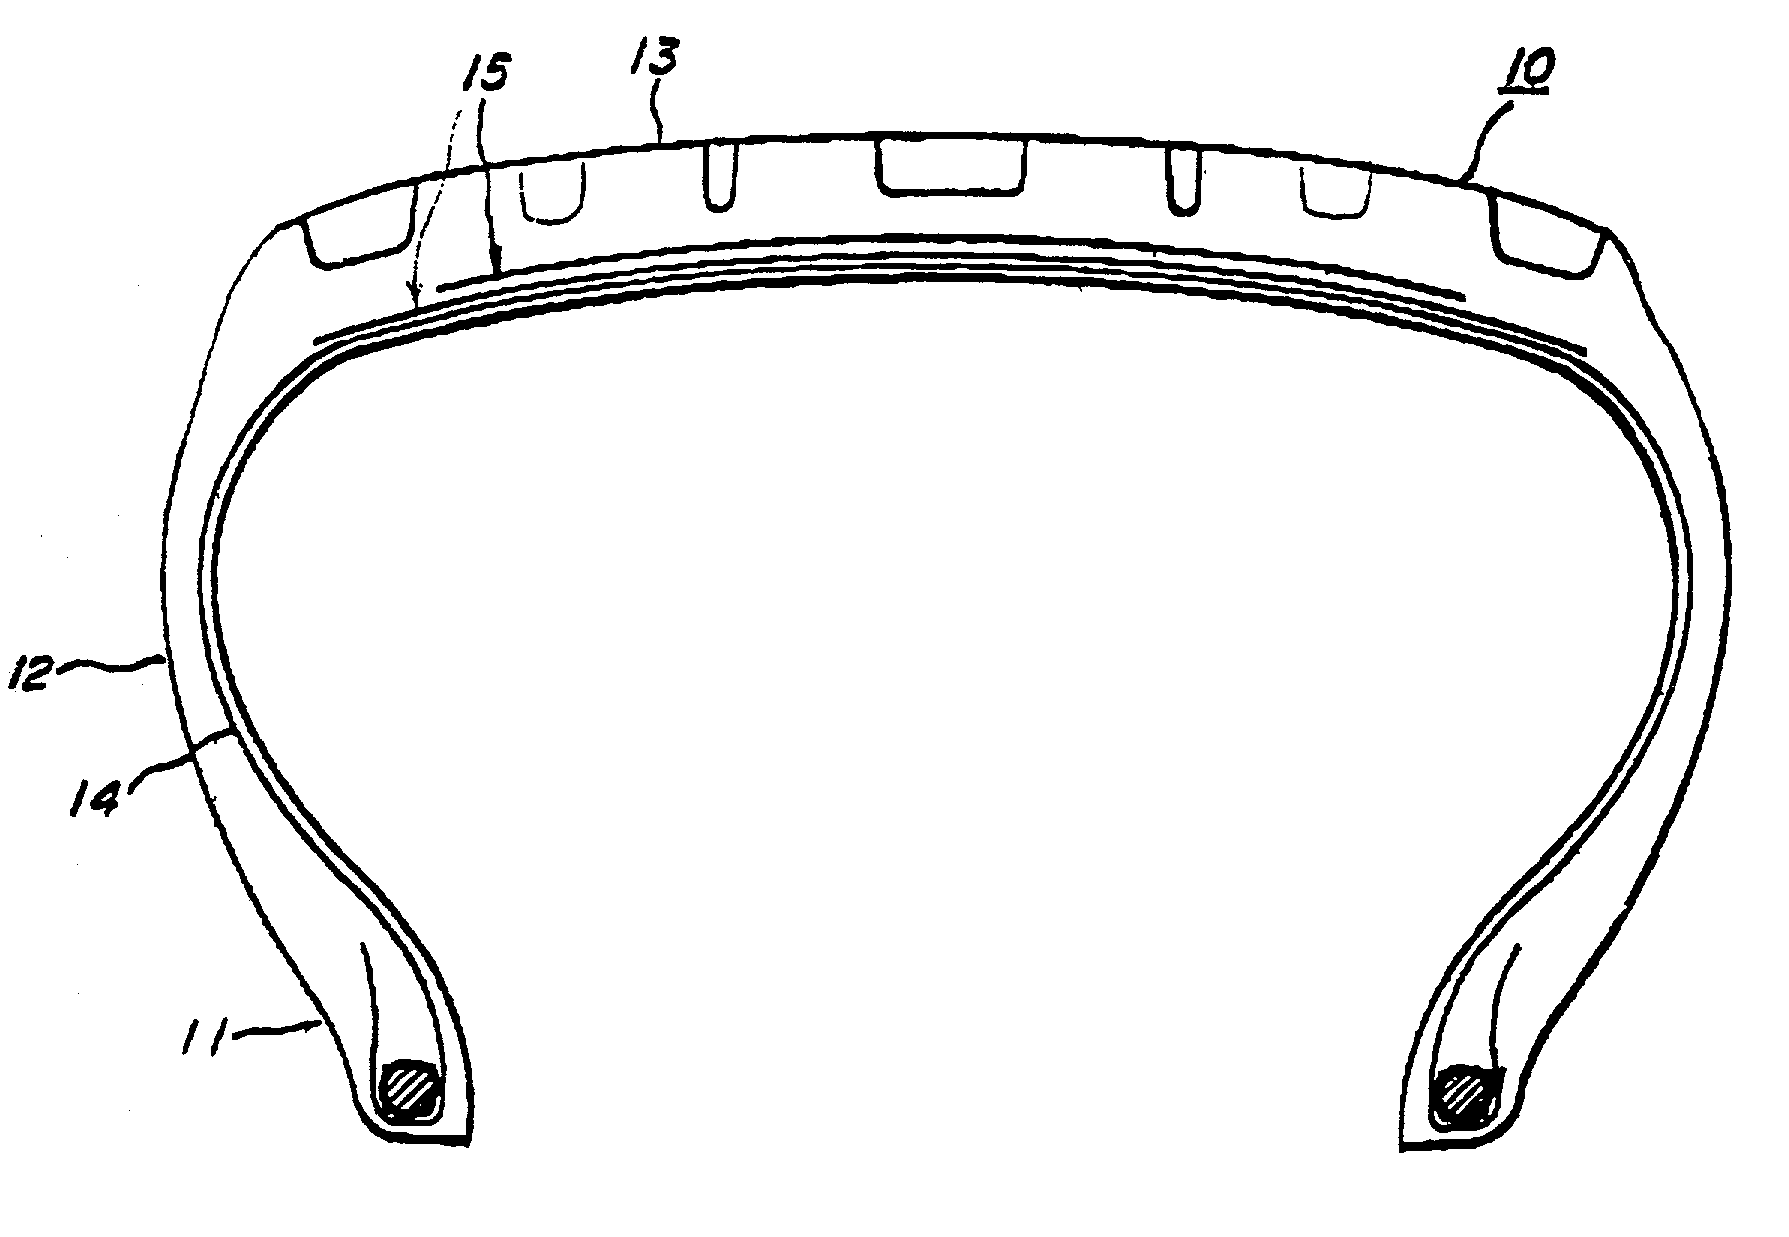 Tire reinforced by an elongate composite element of the monofilament type, and such element